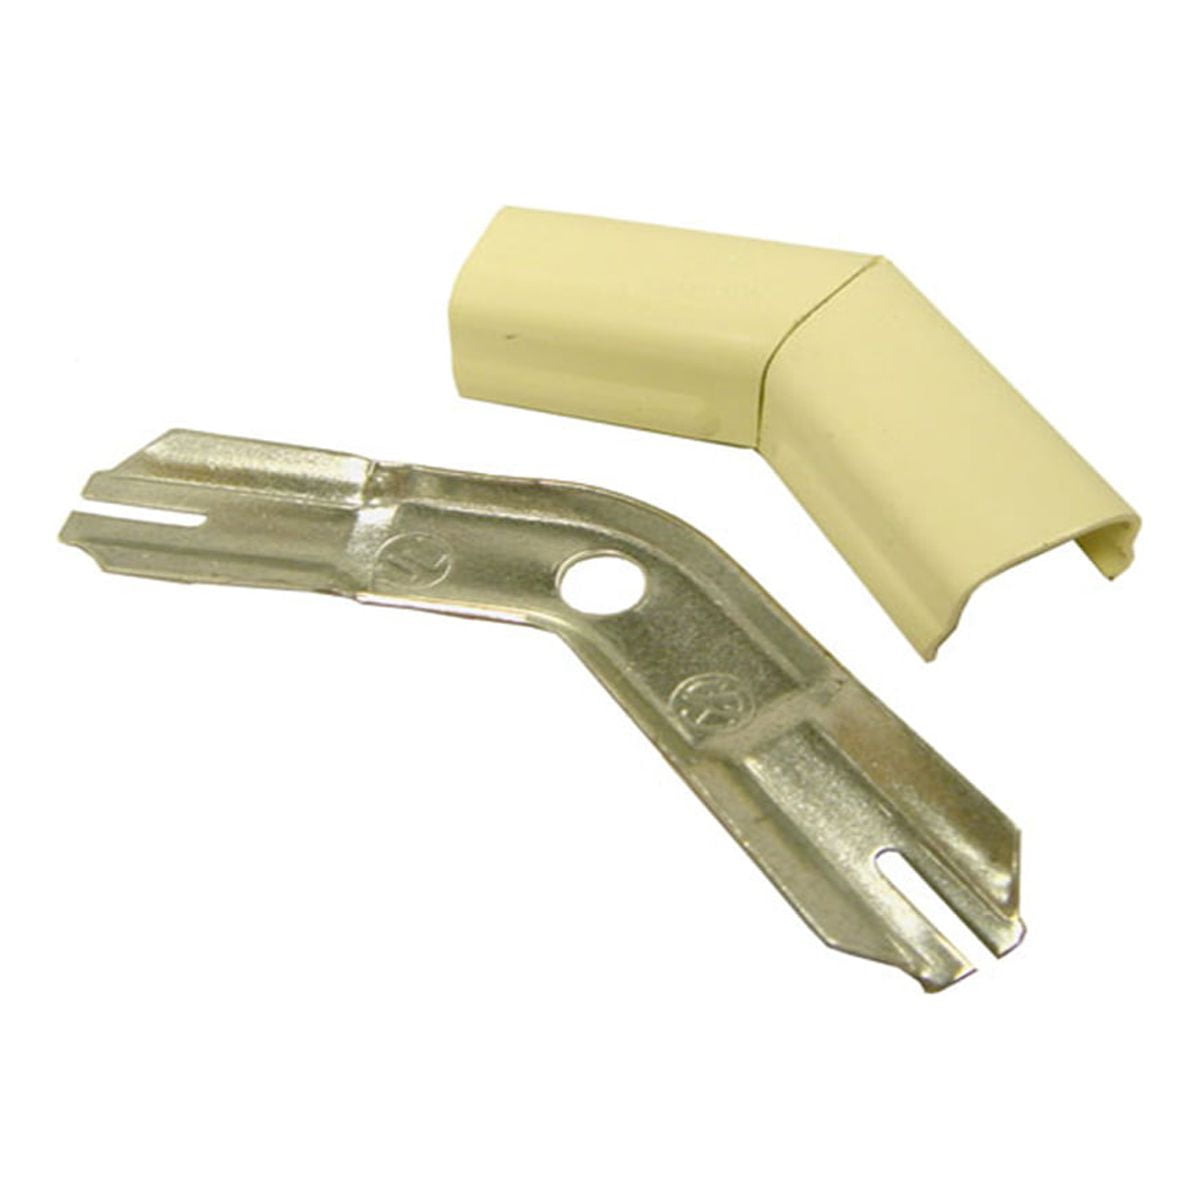 Wiremold V511 :: Raceway 90° Flat Elbow, 500 Series, Steel, Ivory :: Gexpro